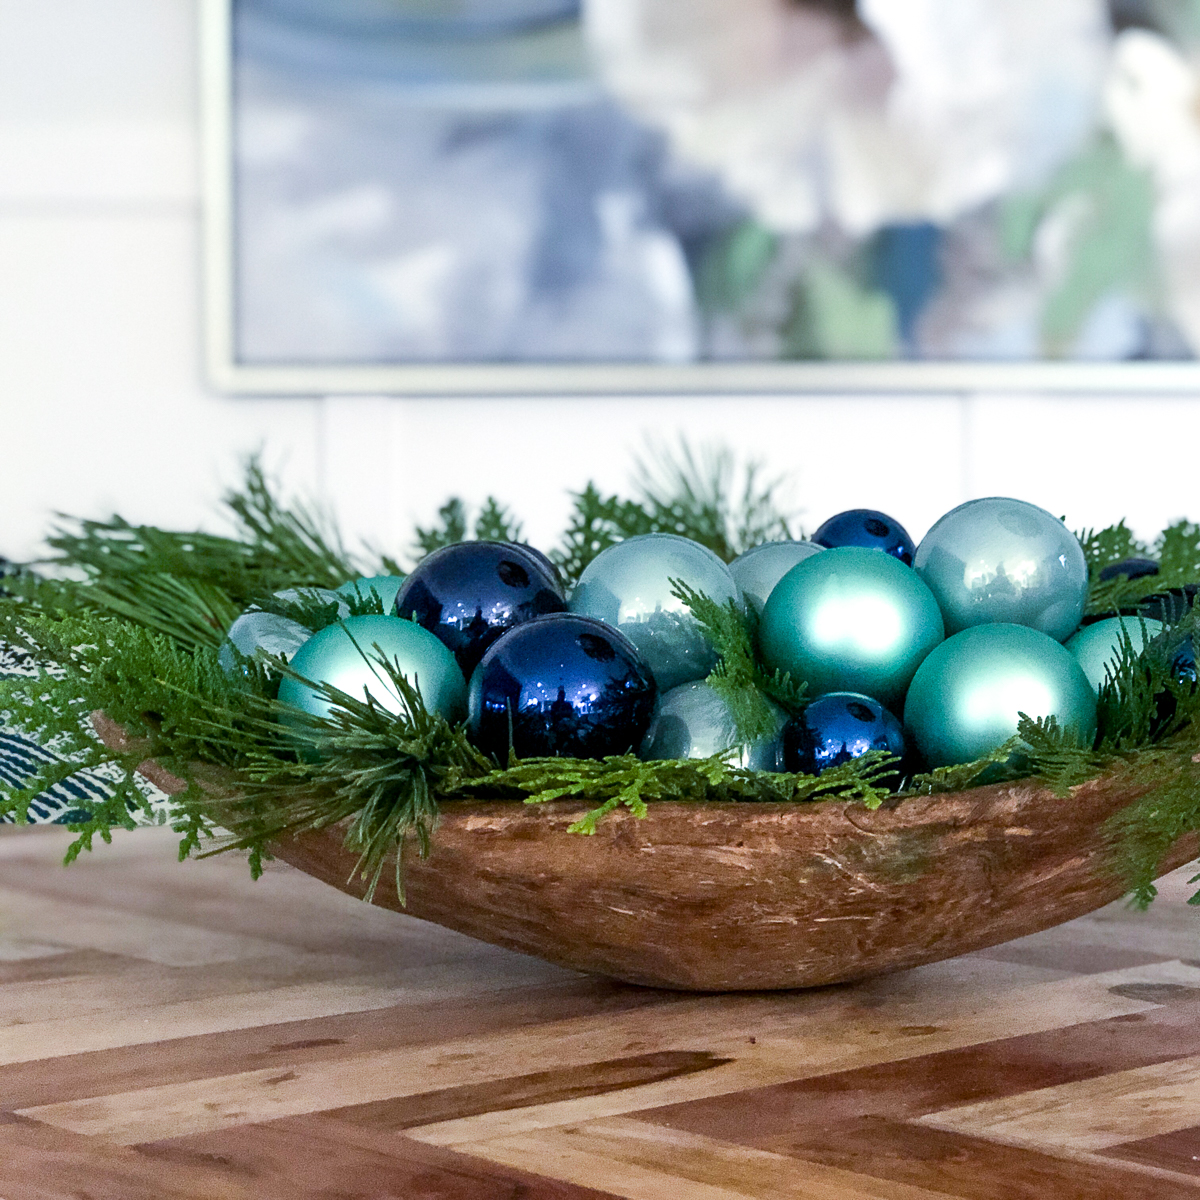 A wooden bowl with the evergreen branches and ornaments in it.